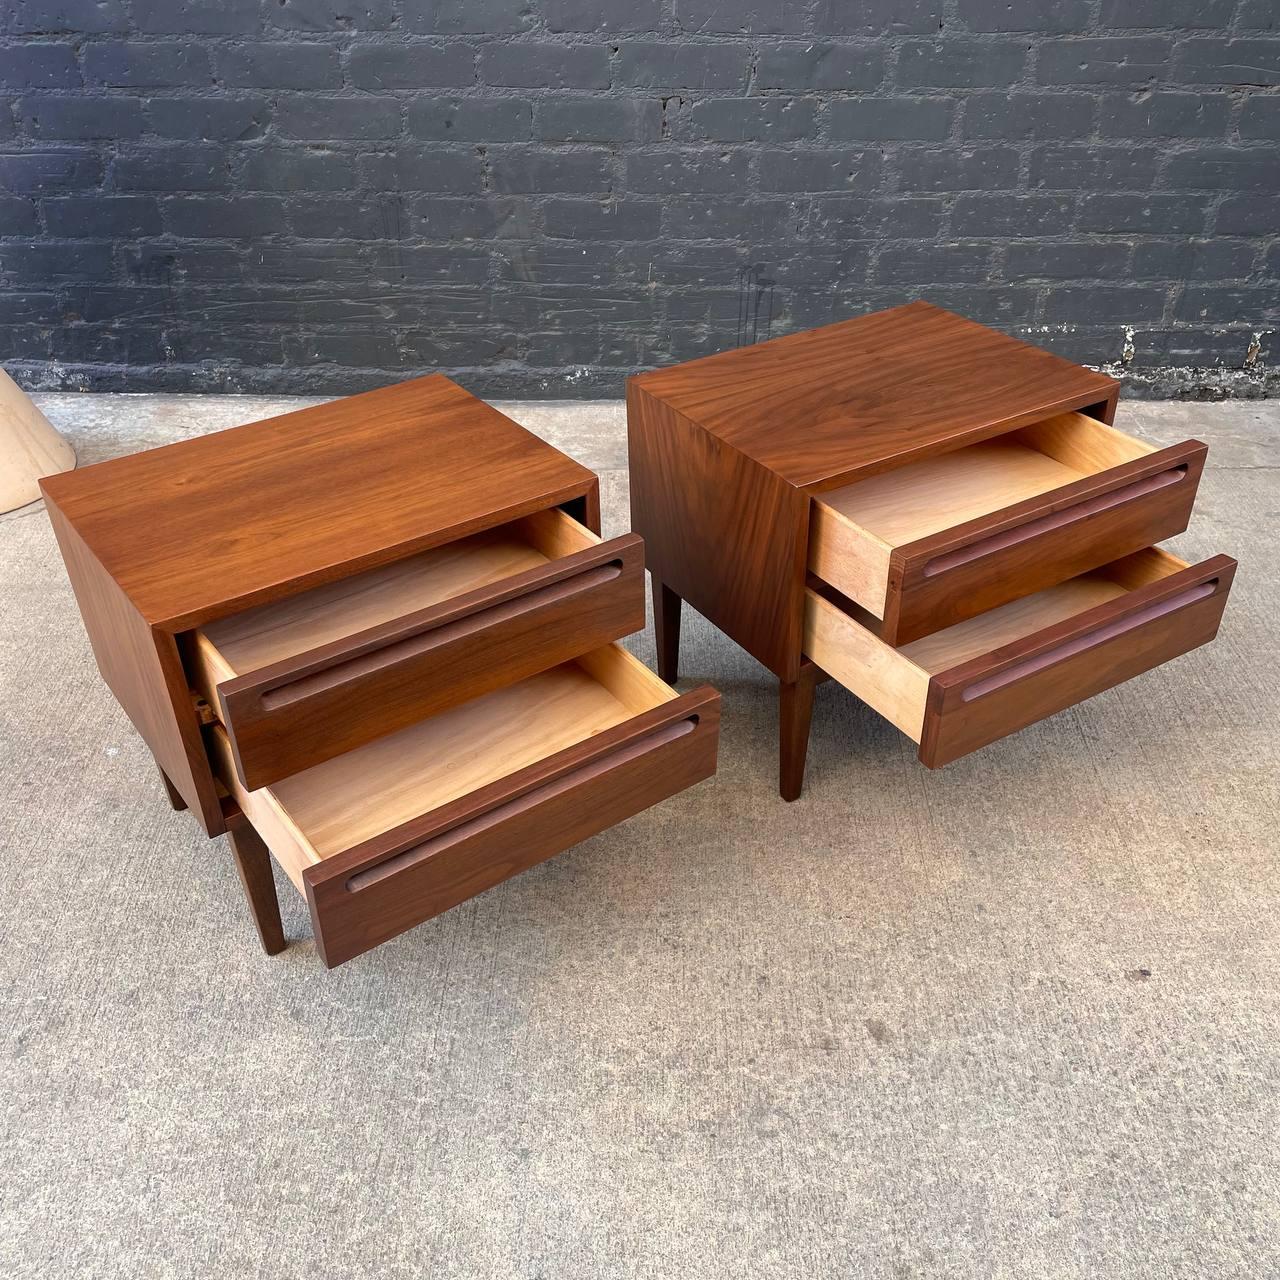 Newly Refinished -  Pair of Mid-Century Modern Walnut Night Stands  In Excellent Condition For Sale In Los Angeles, CA